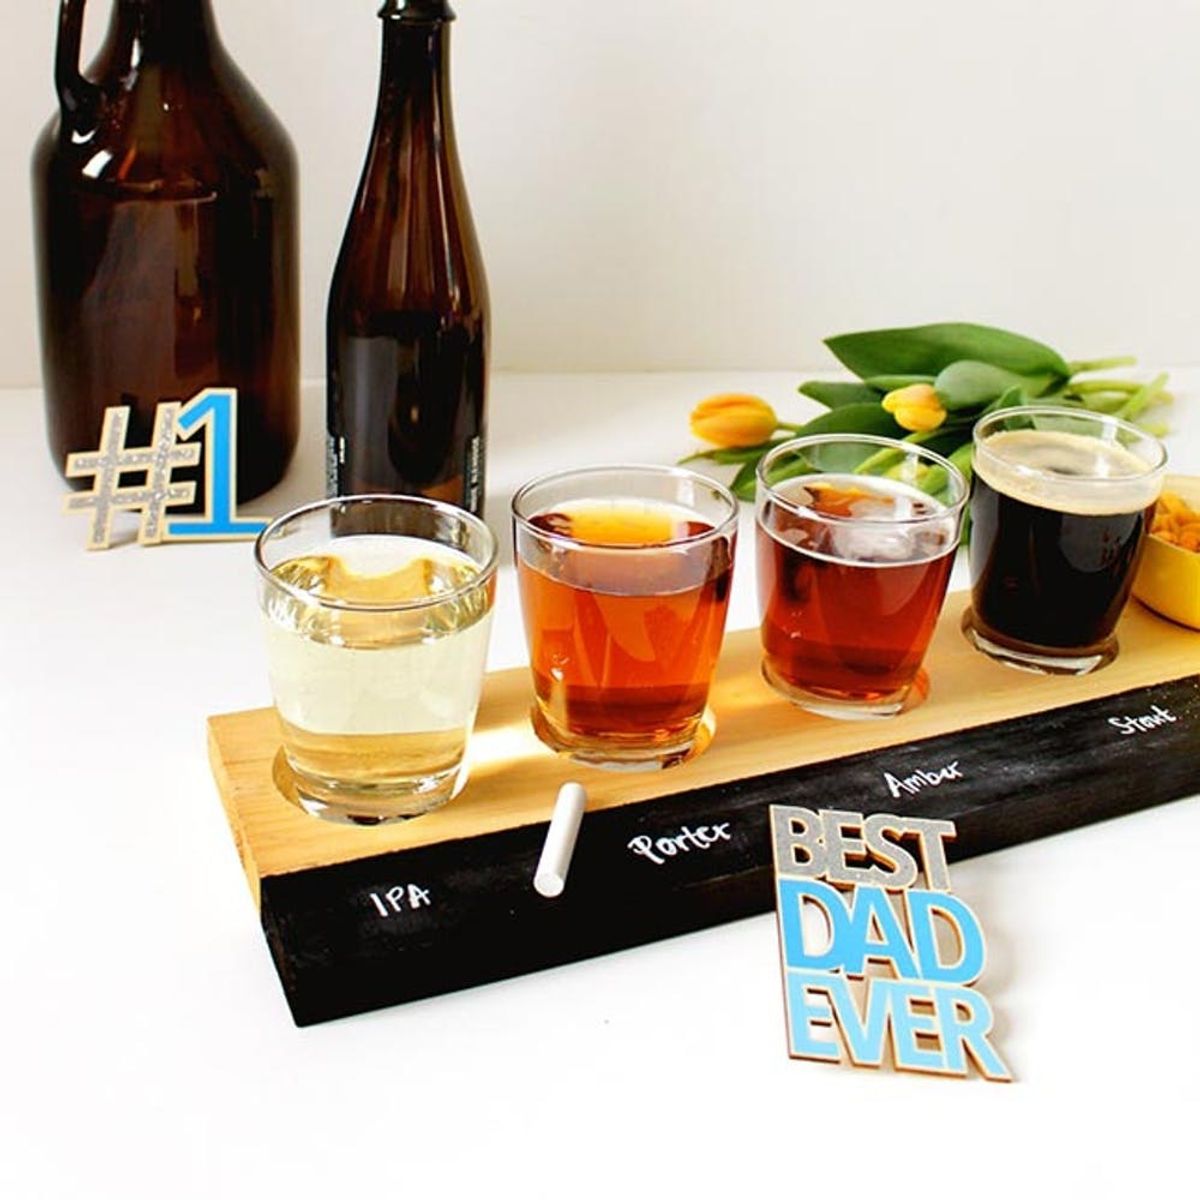 Make Dad a Beer-Tasting Flight Tray for Father’s Day